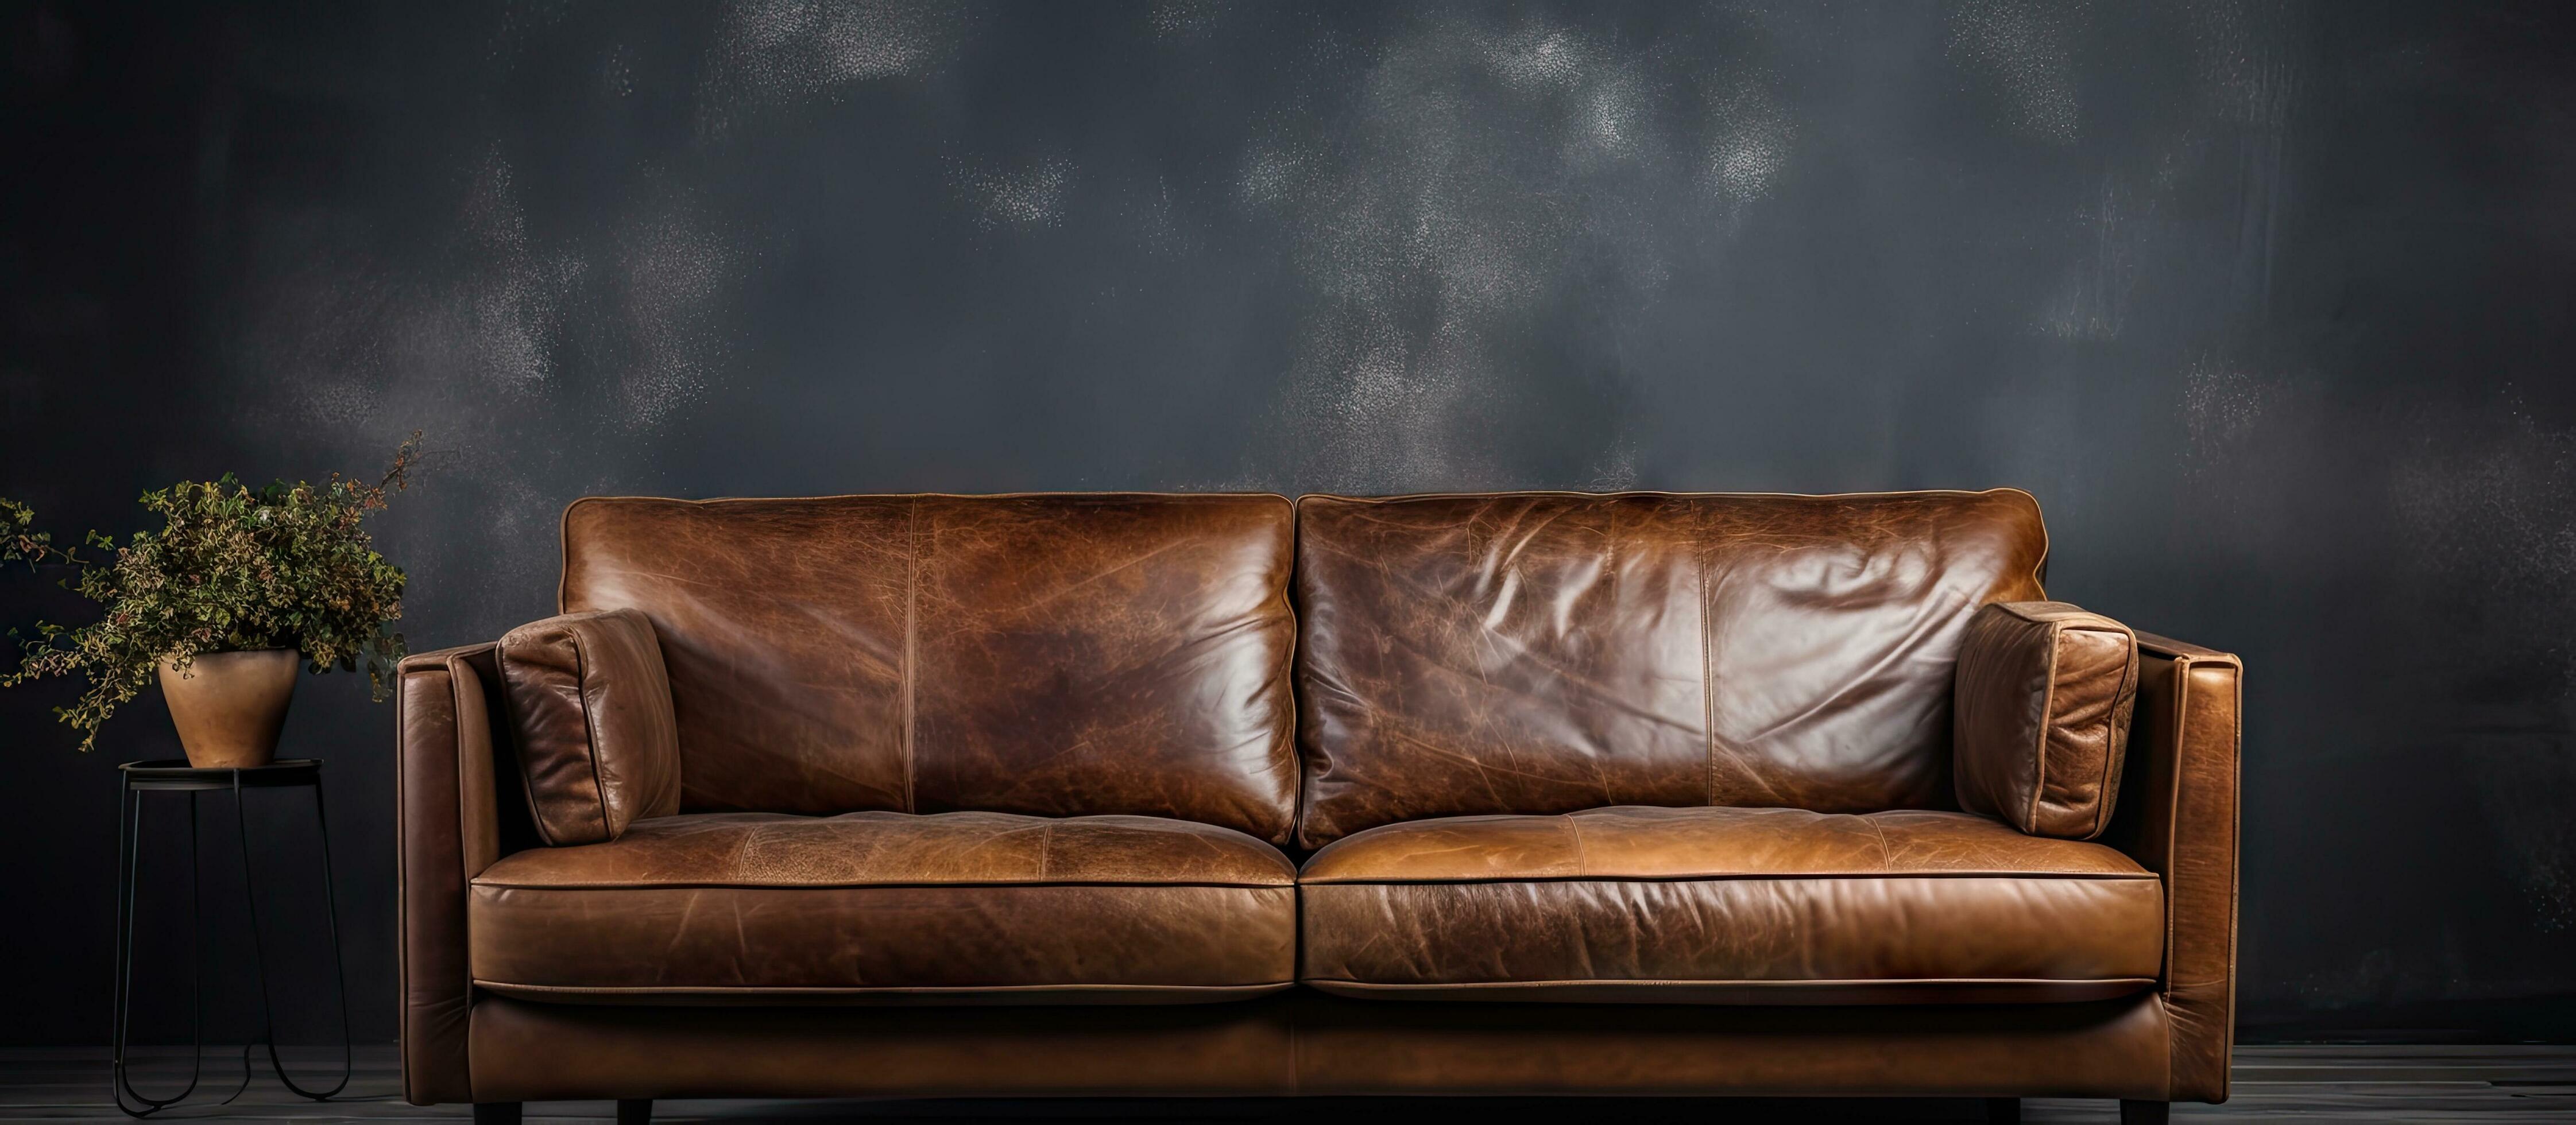 A Worn Brown Leather Sofa In The Apartment Perfect For Unwinding 28217340 Stock Photo At Vecy